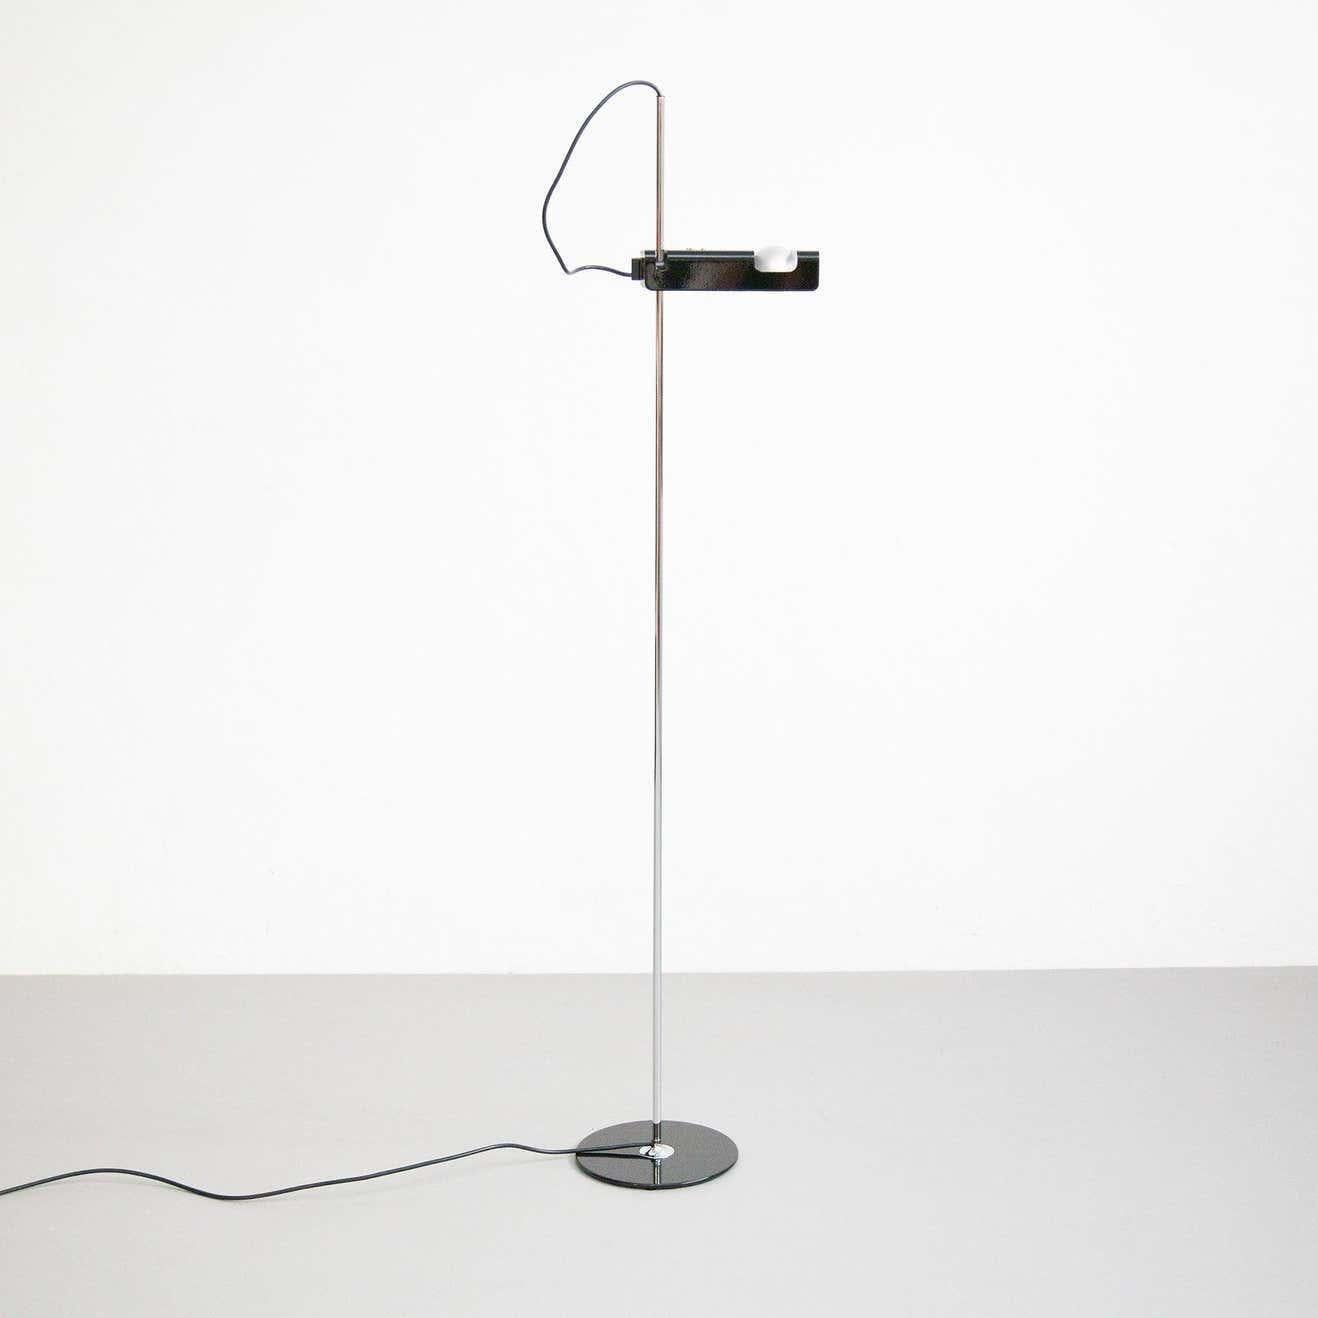 Floor lamp 'Agnoli' designed by Tito Agnoli in 1954.
Floor lamp giving direct light, lacquered metal base, chromium-plated stem, adjustable reflector in lacquered aluminium. Manufactured by Oluce, Italy.

Floor lamp with stove-enameled sheet